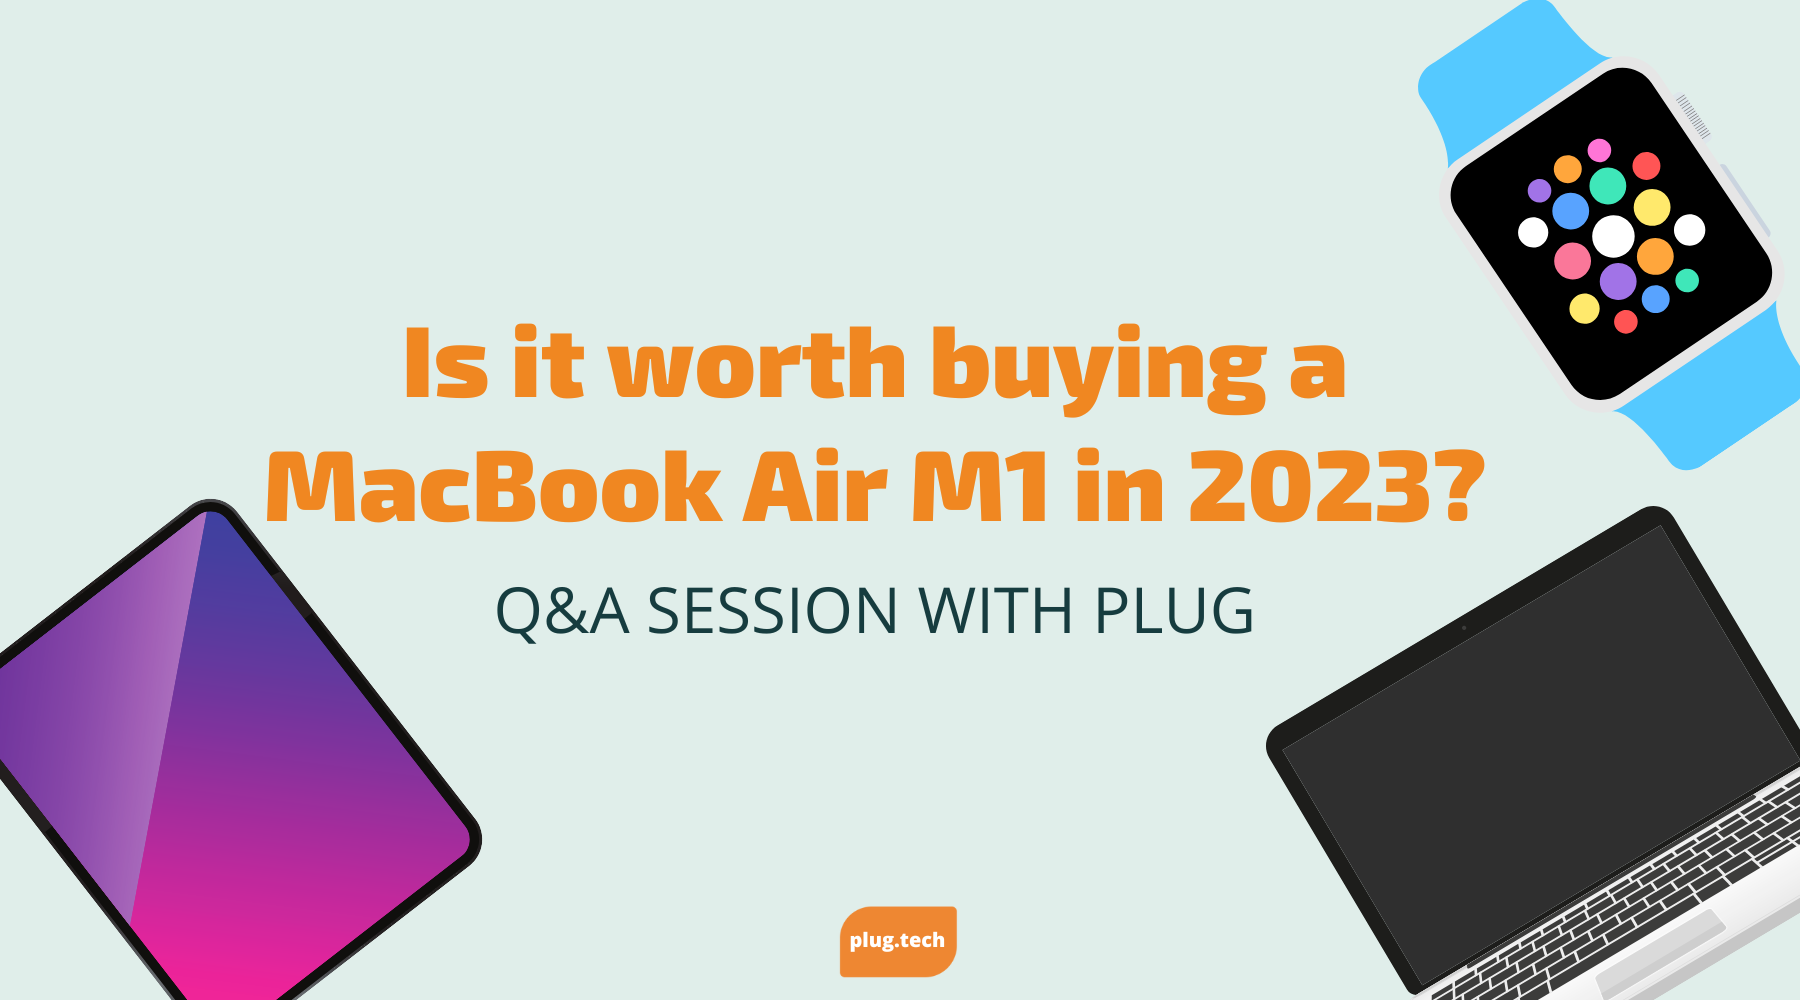 Is it worth buying a MacBook Air M1 in 2023?